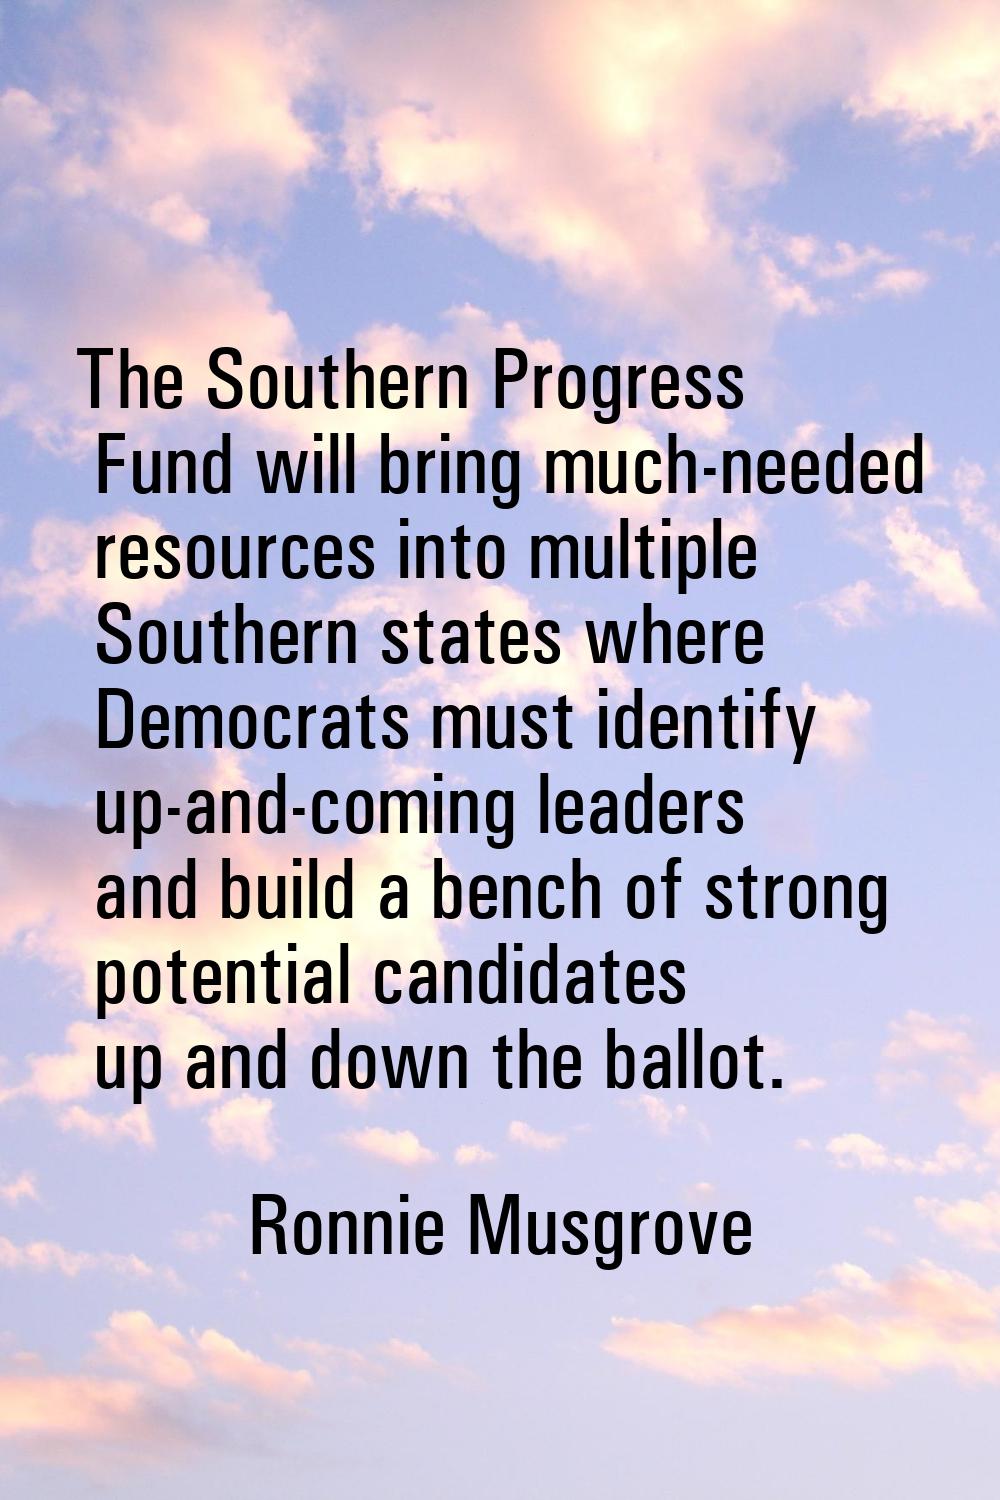 The Southern Progress Fund will bring much-needed resources into multiple Southern states where Dem